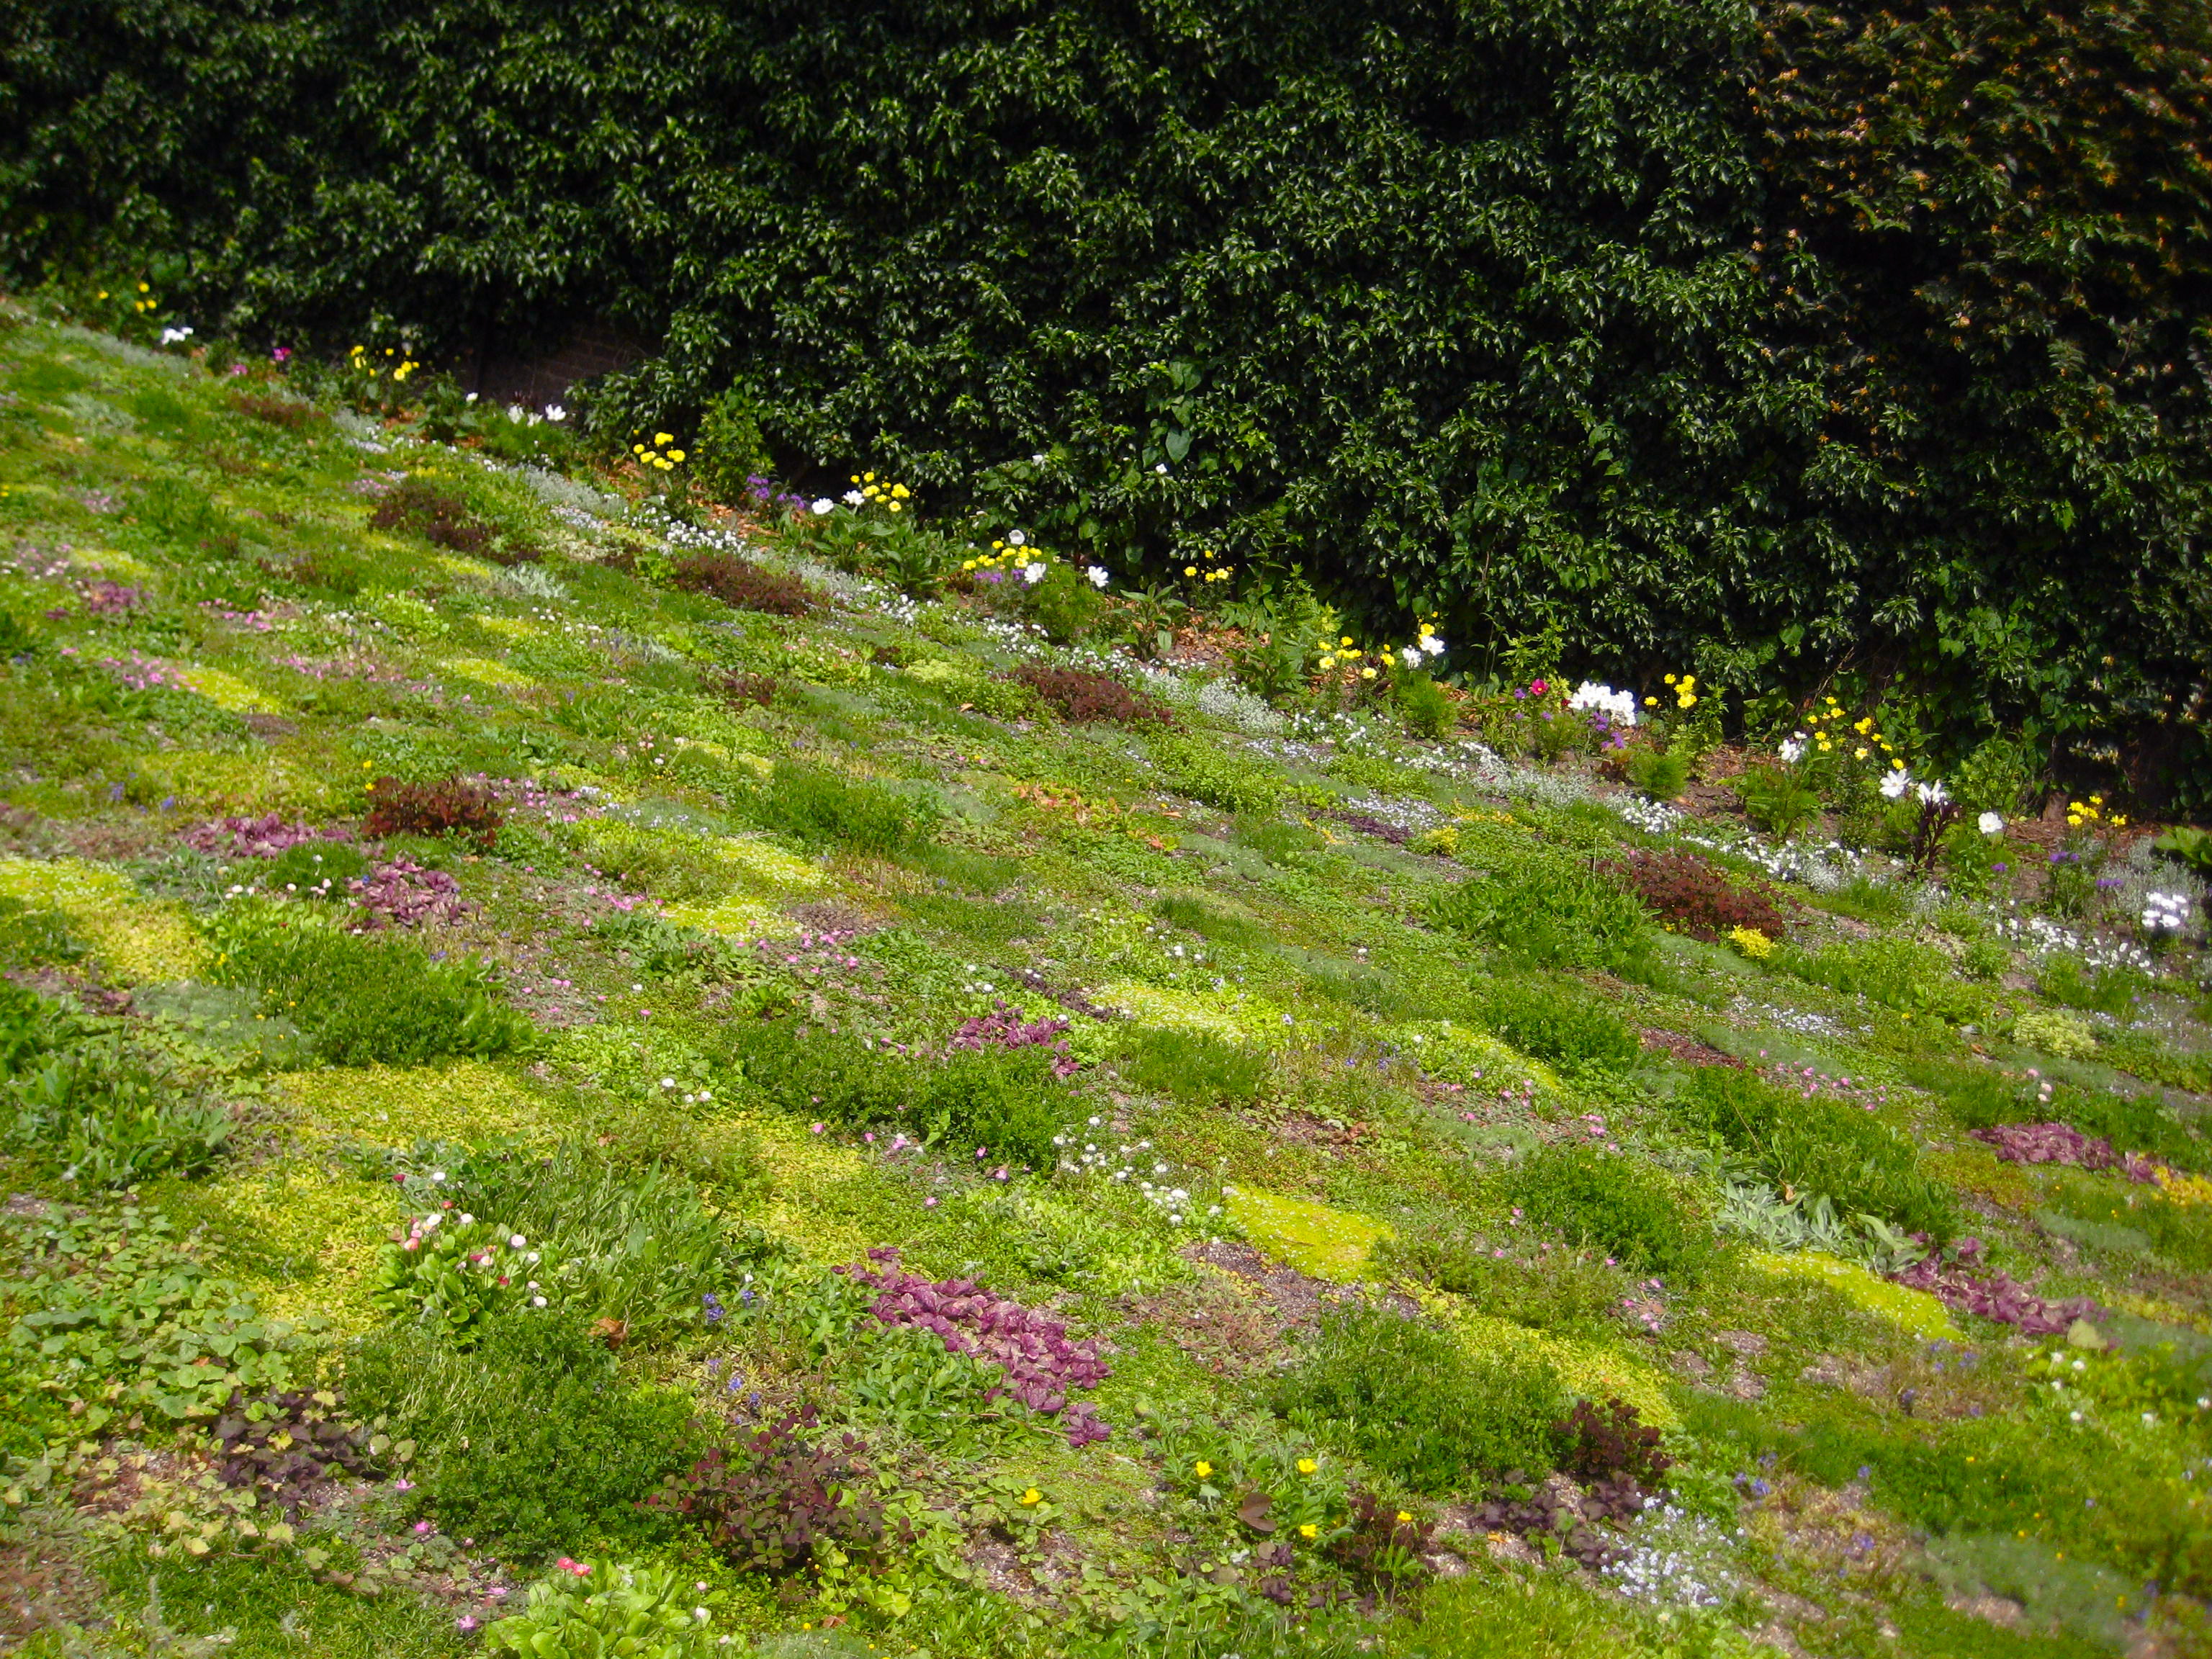 Revival of the floral lawn | Plants and us